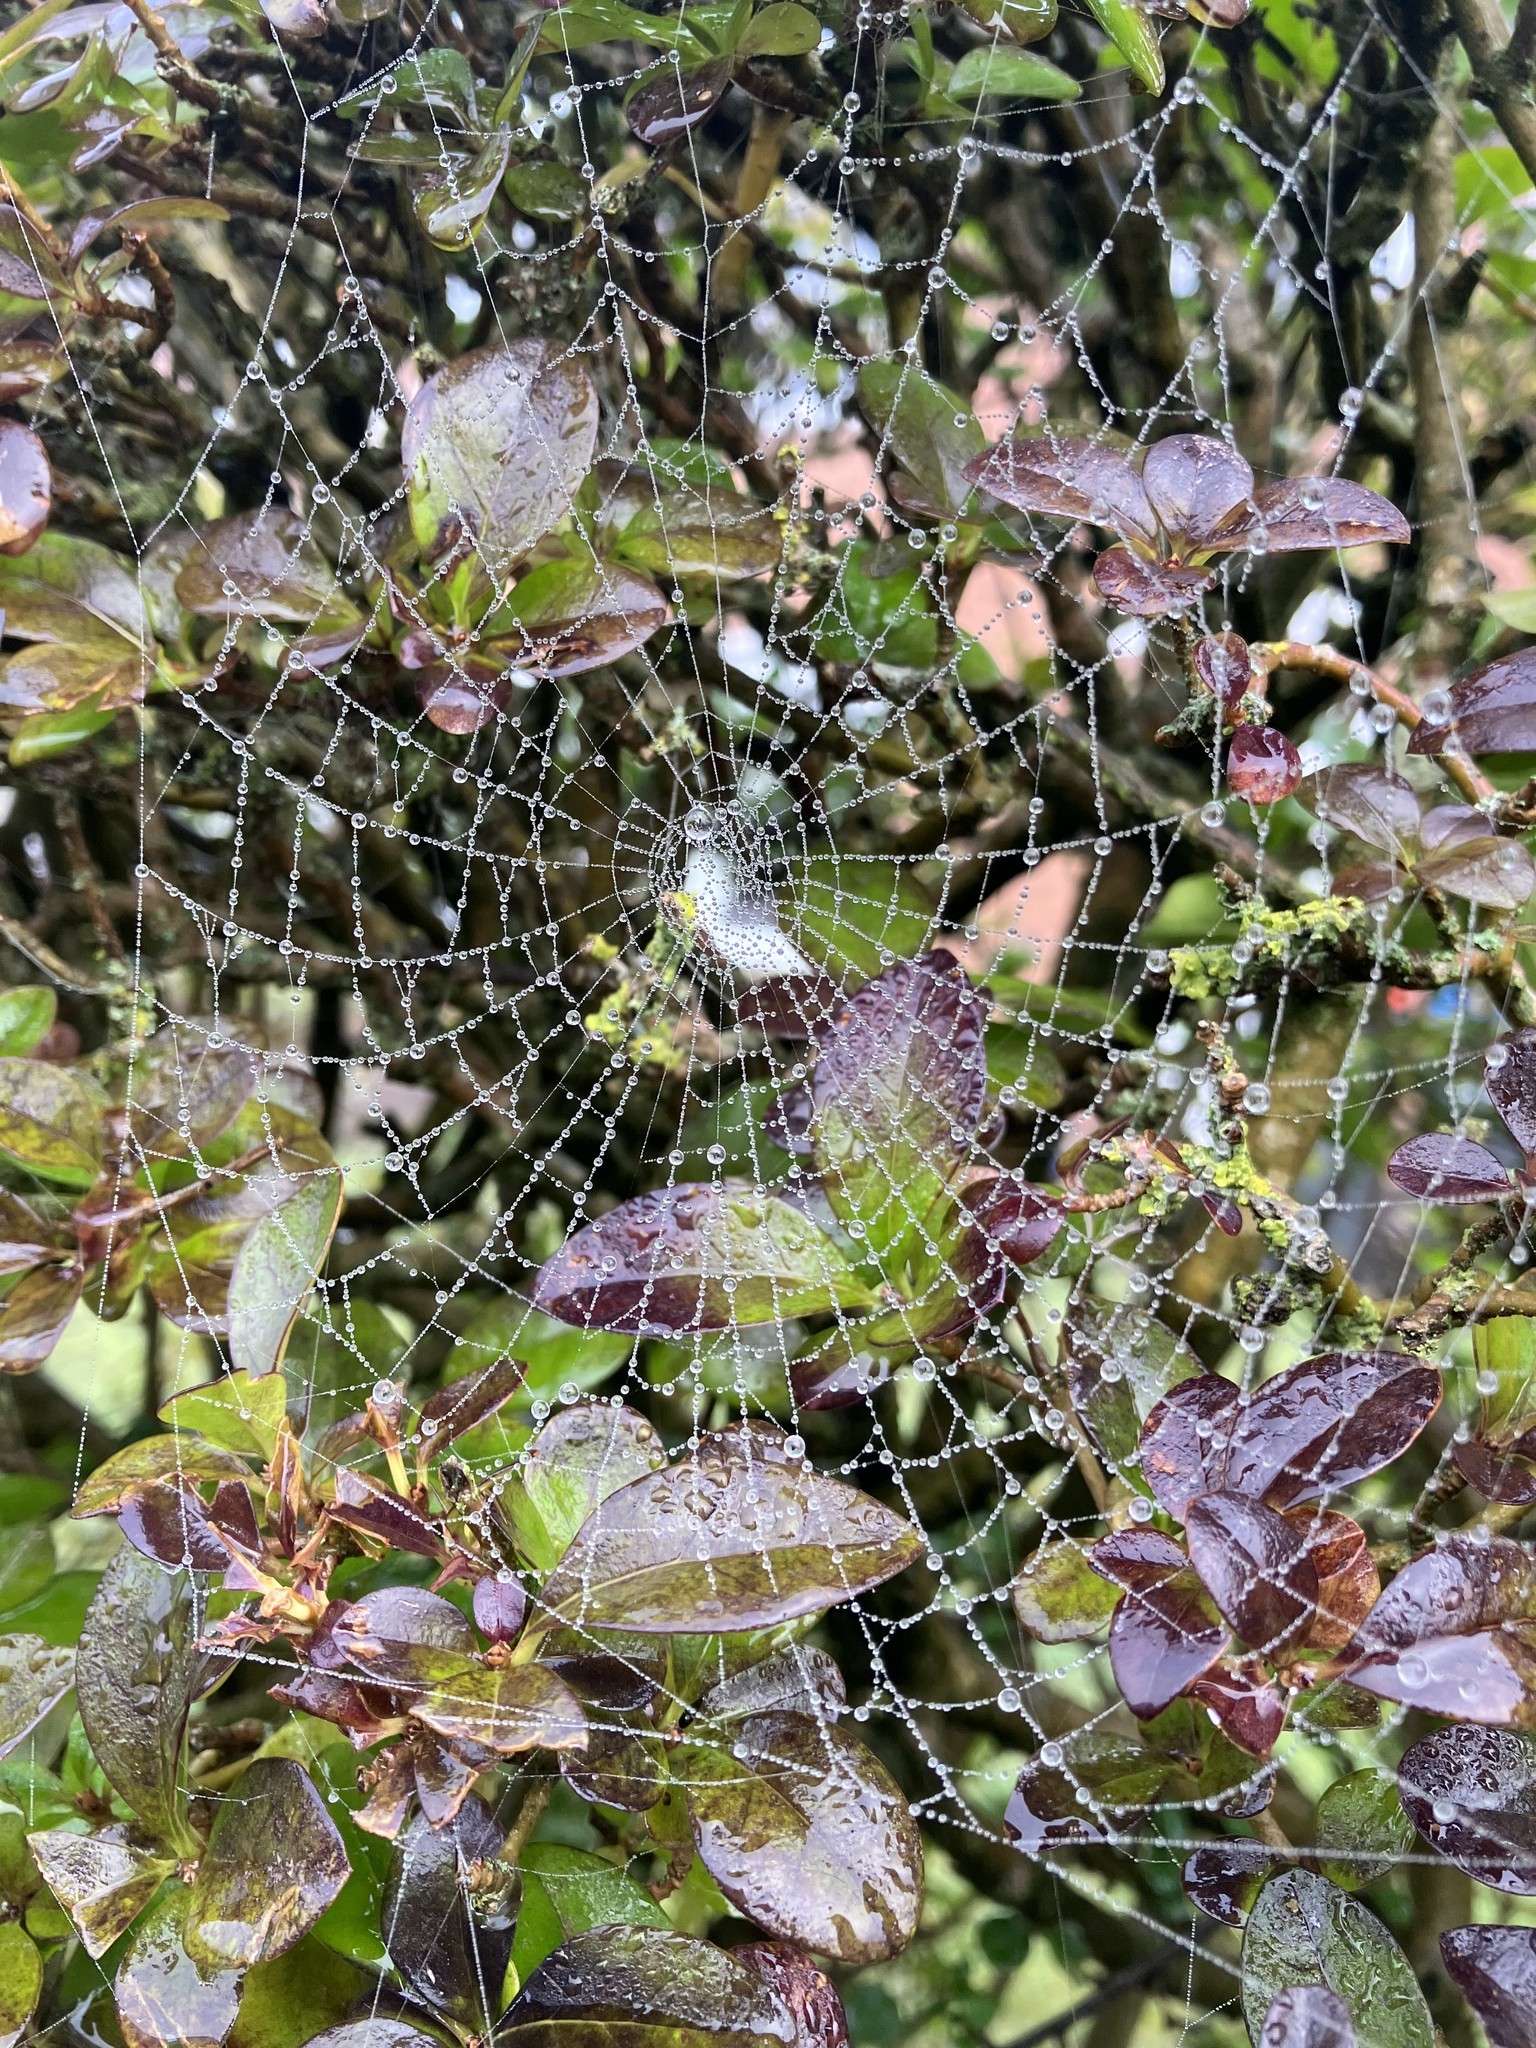 Spiders web by Wendy Mahon